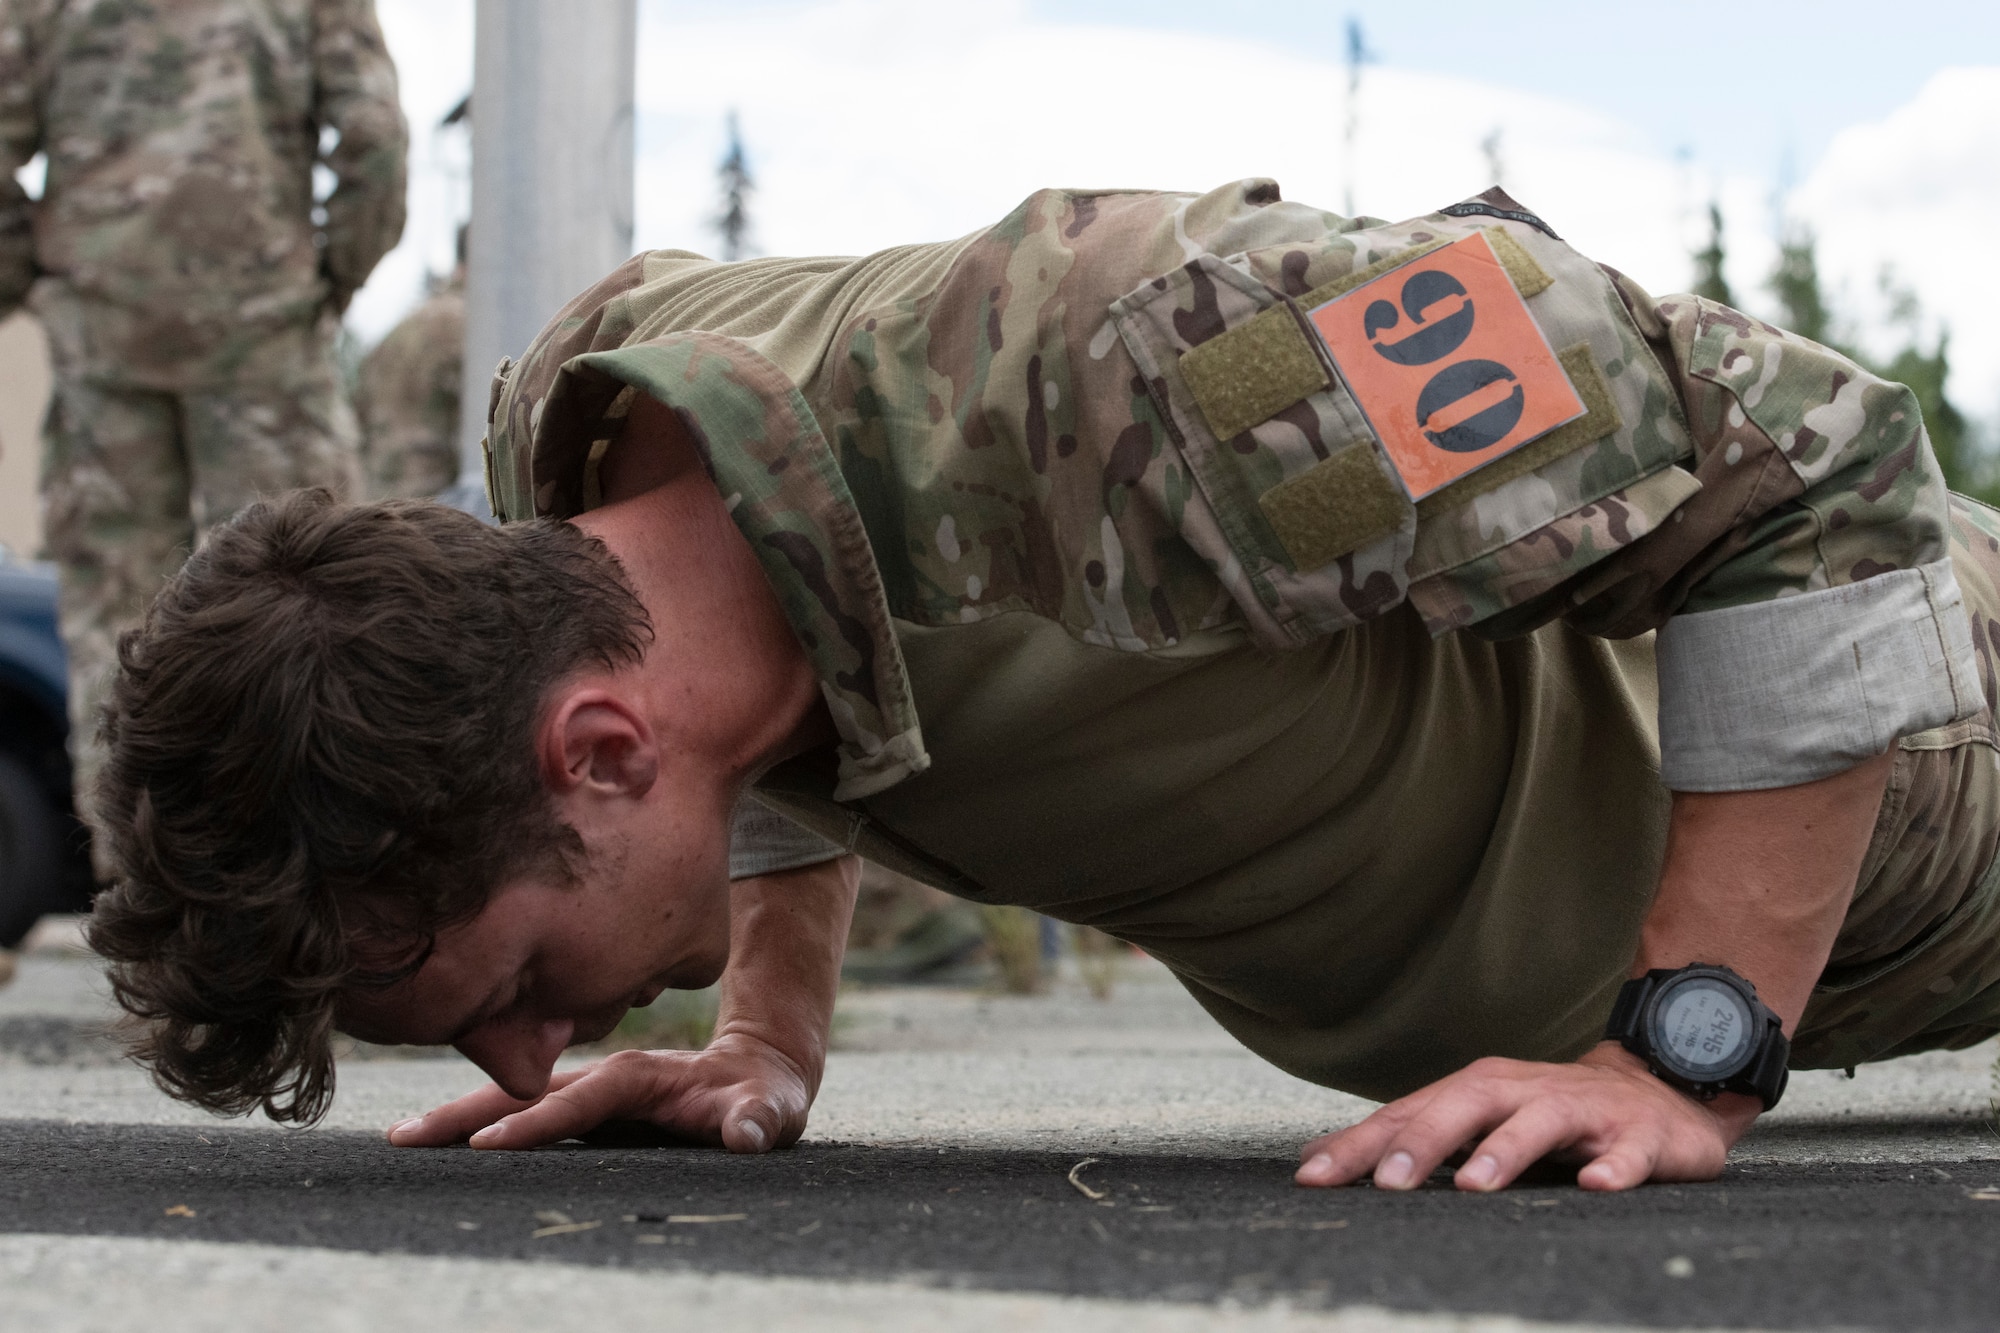 U.S. Air Force Senior Staff Sgt. Garrett Geske, tactical air control party (TACP) specialist, 3rd Air Support Operations Squadron, performs push-ups during the Chaos Challenge 2021 at Joint Base Elmendorf-Richardson, Alaska, July 13, 2021. The Chaos Challenge 2021 was a multi-day series of mental and physical contests sponsored by the 1st Air Support Operations Group with participants from the 3rd, 5th, 25th, and 604th Air Support Operations Squadrons and a guest team from the 673d Security Forces Squadron. The winner of the competition will go on to compete in Lightning Challenge 2021 to determine the best two-man TACP team in the Air Force.